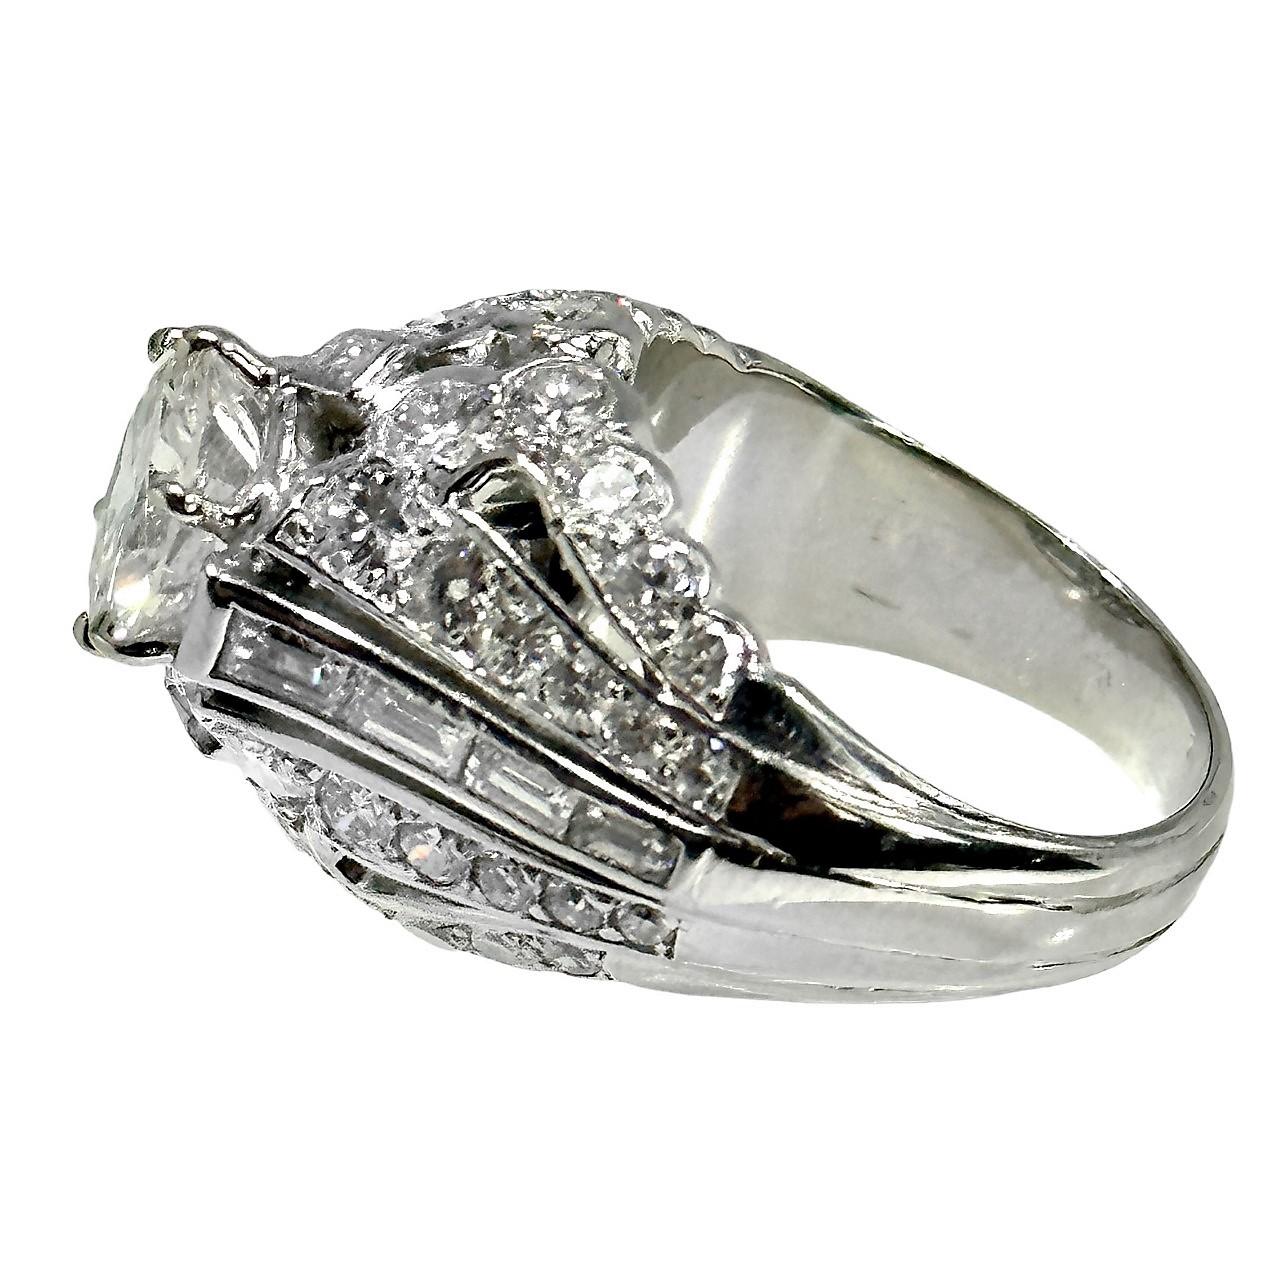 Modern Elegant Mid-20th Century French Platinum Diamond Solitaire Ring 1.98ct Center  For Sale